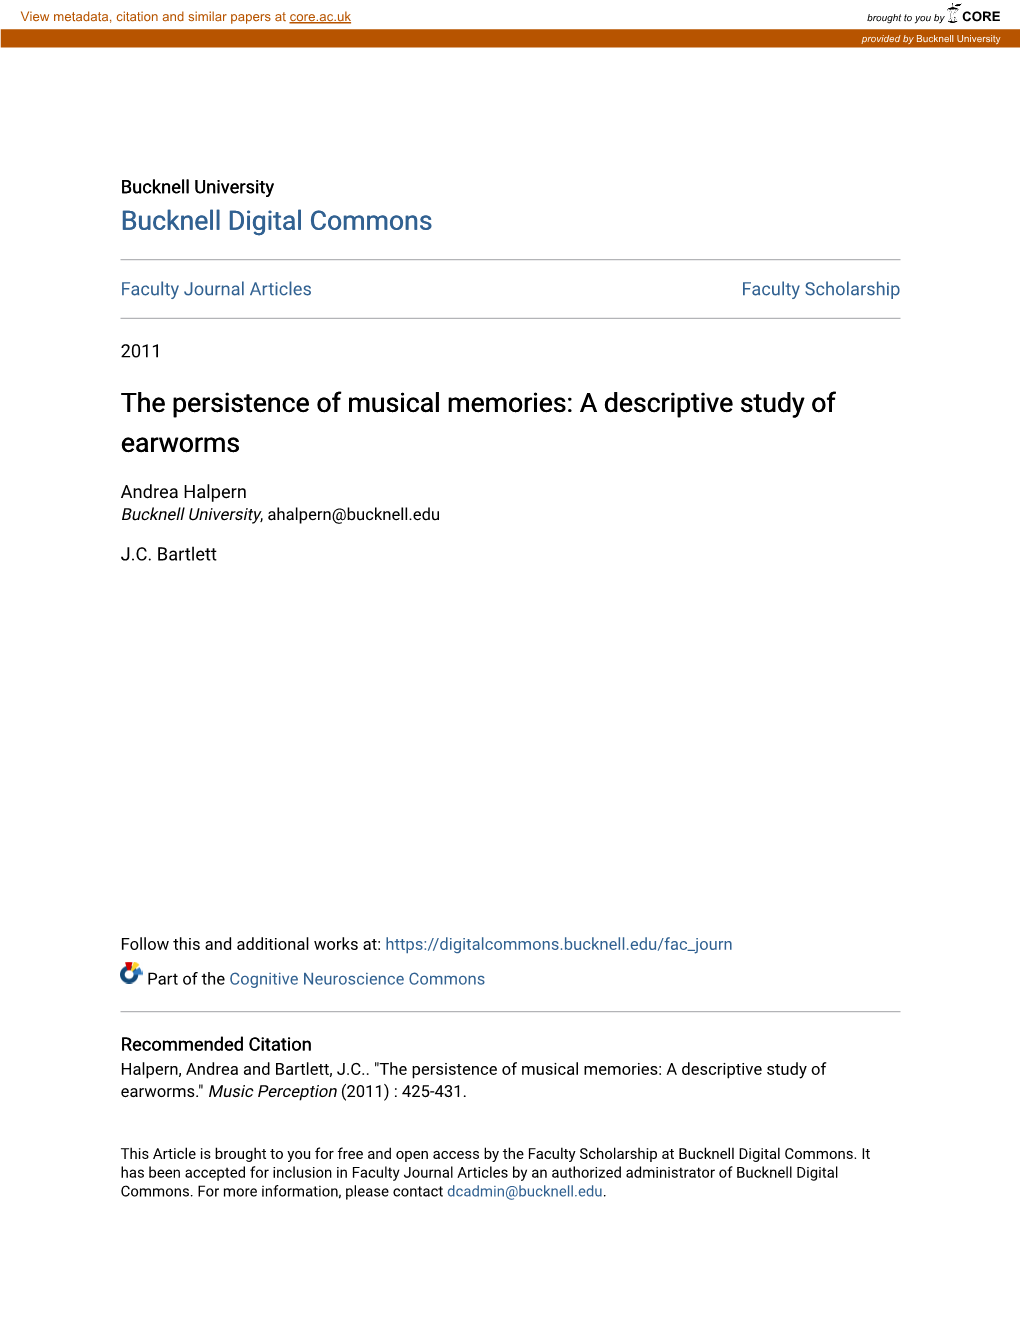 The Persistence of Musical Memories: a Descriptive Study of Earworms